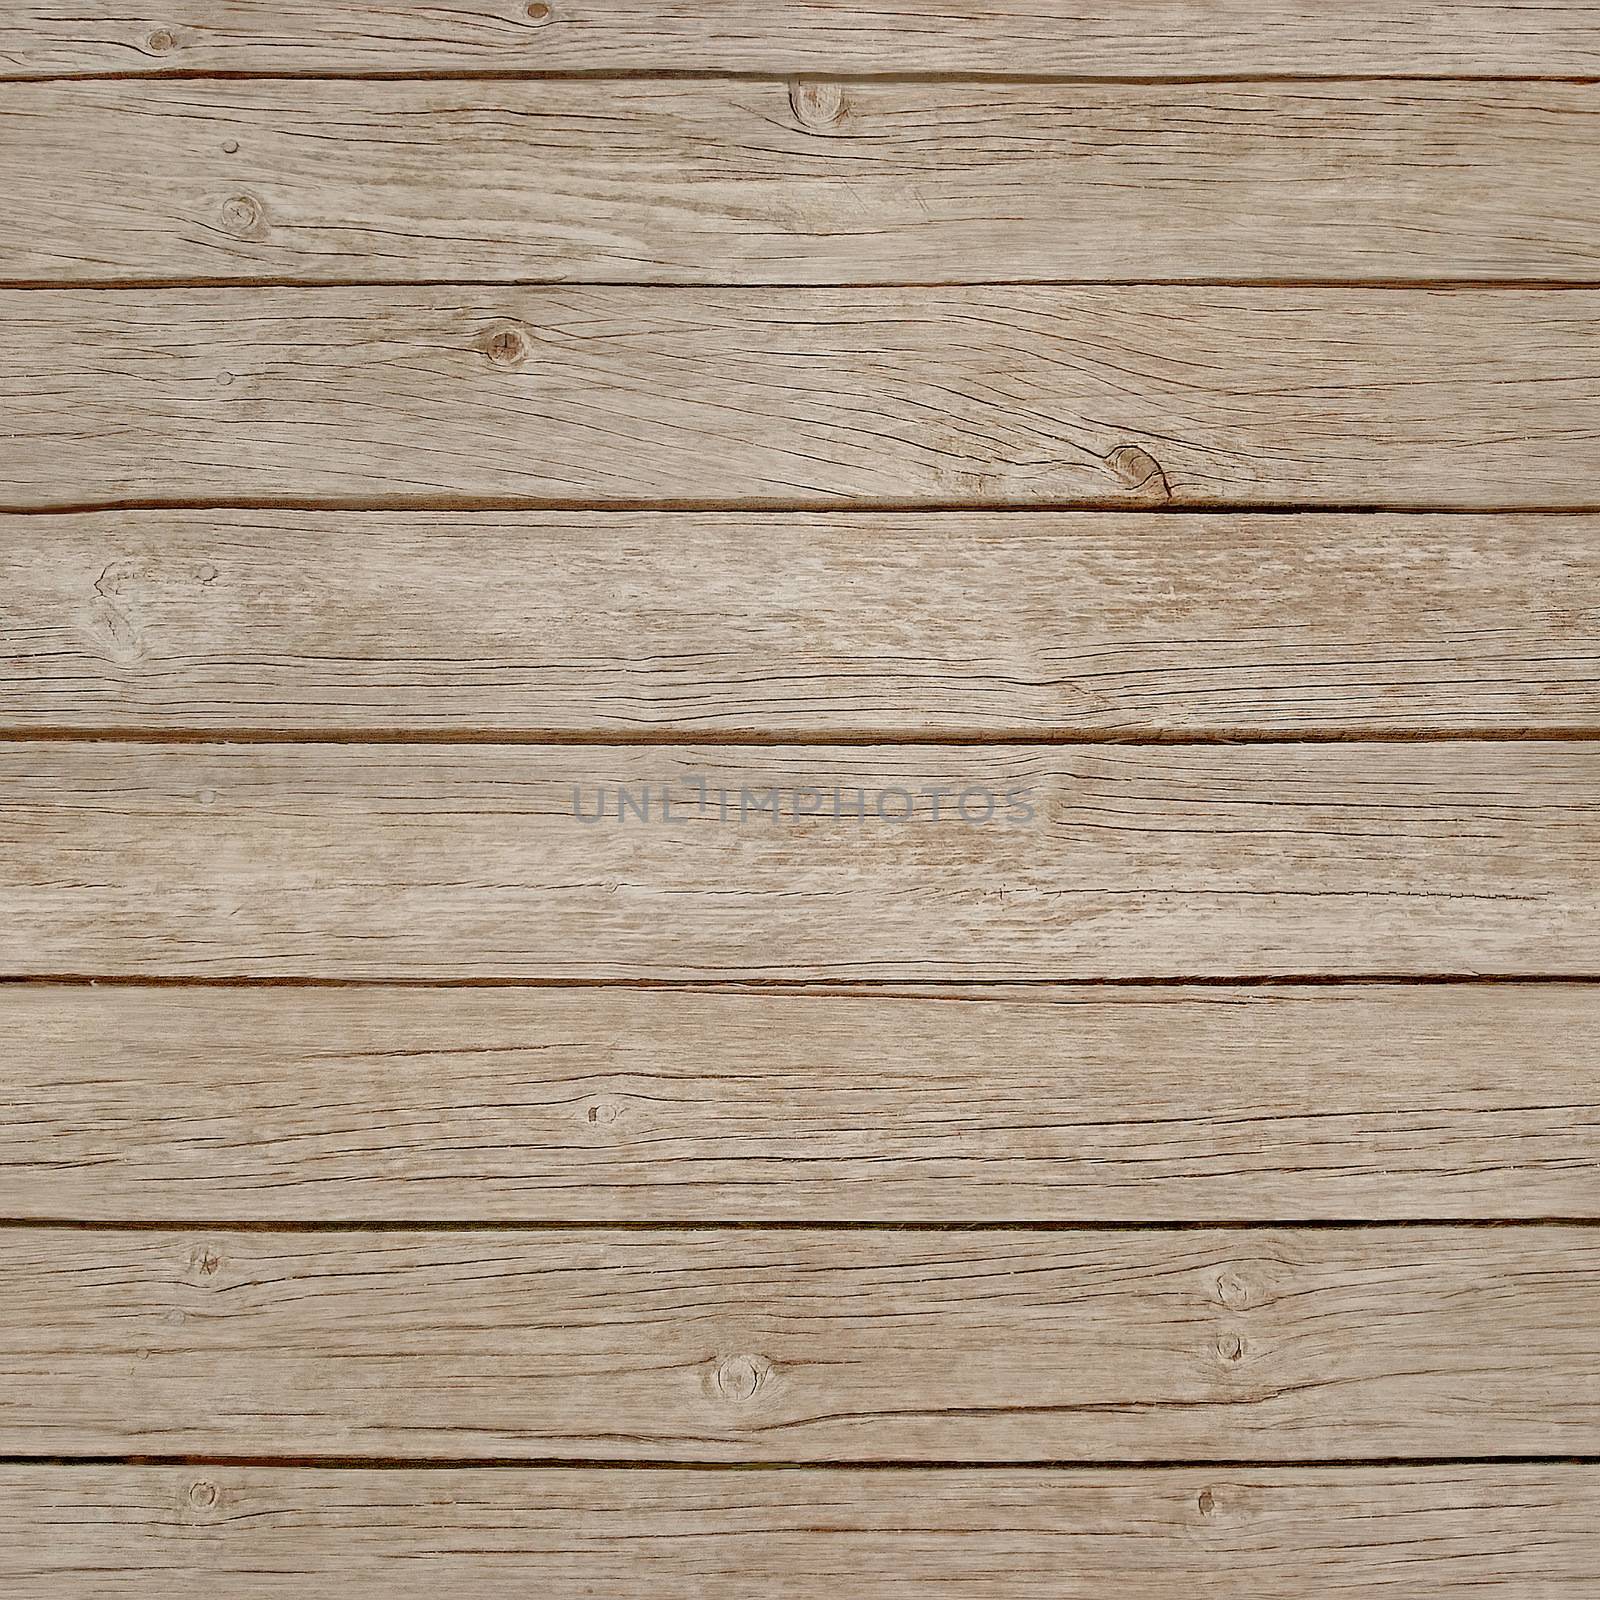 Wooden floor with light brown Board texture background images